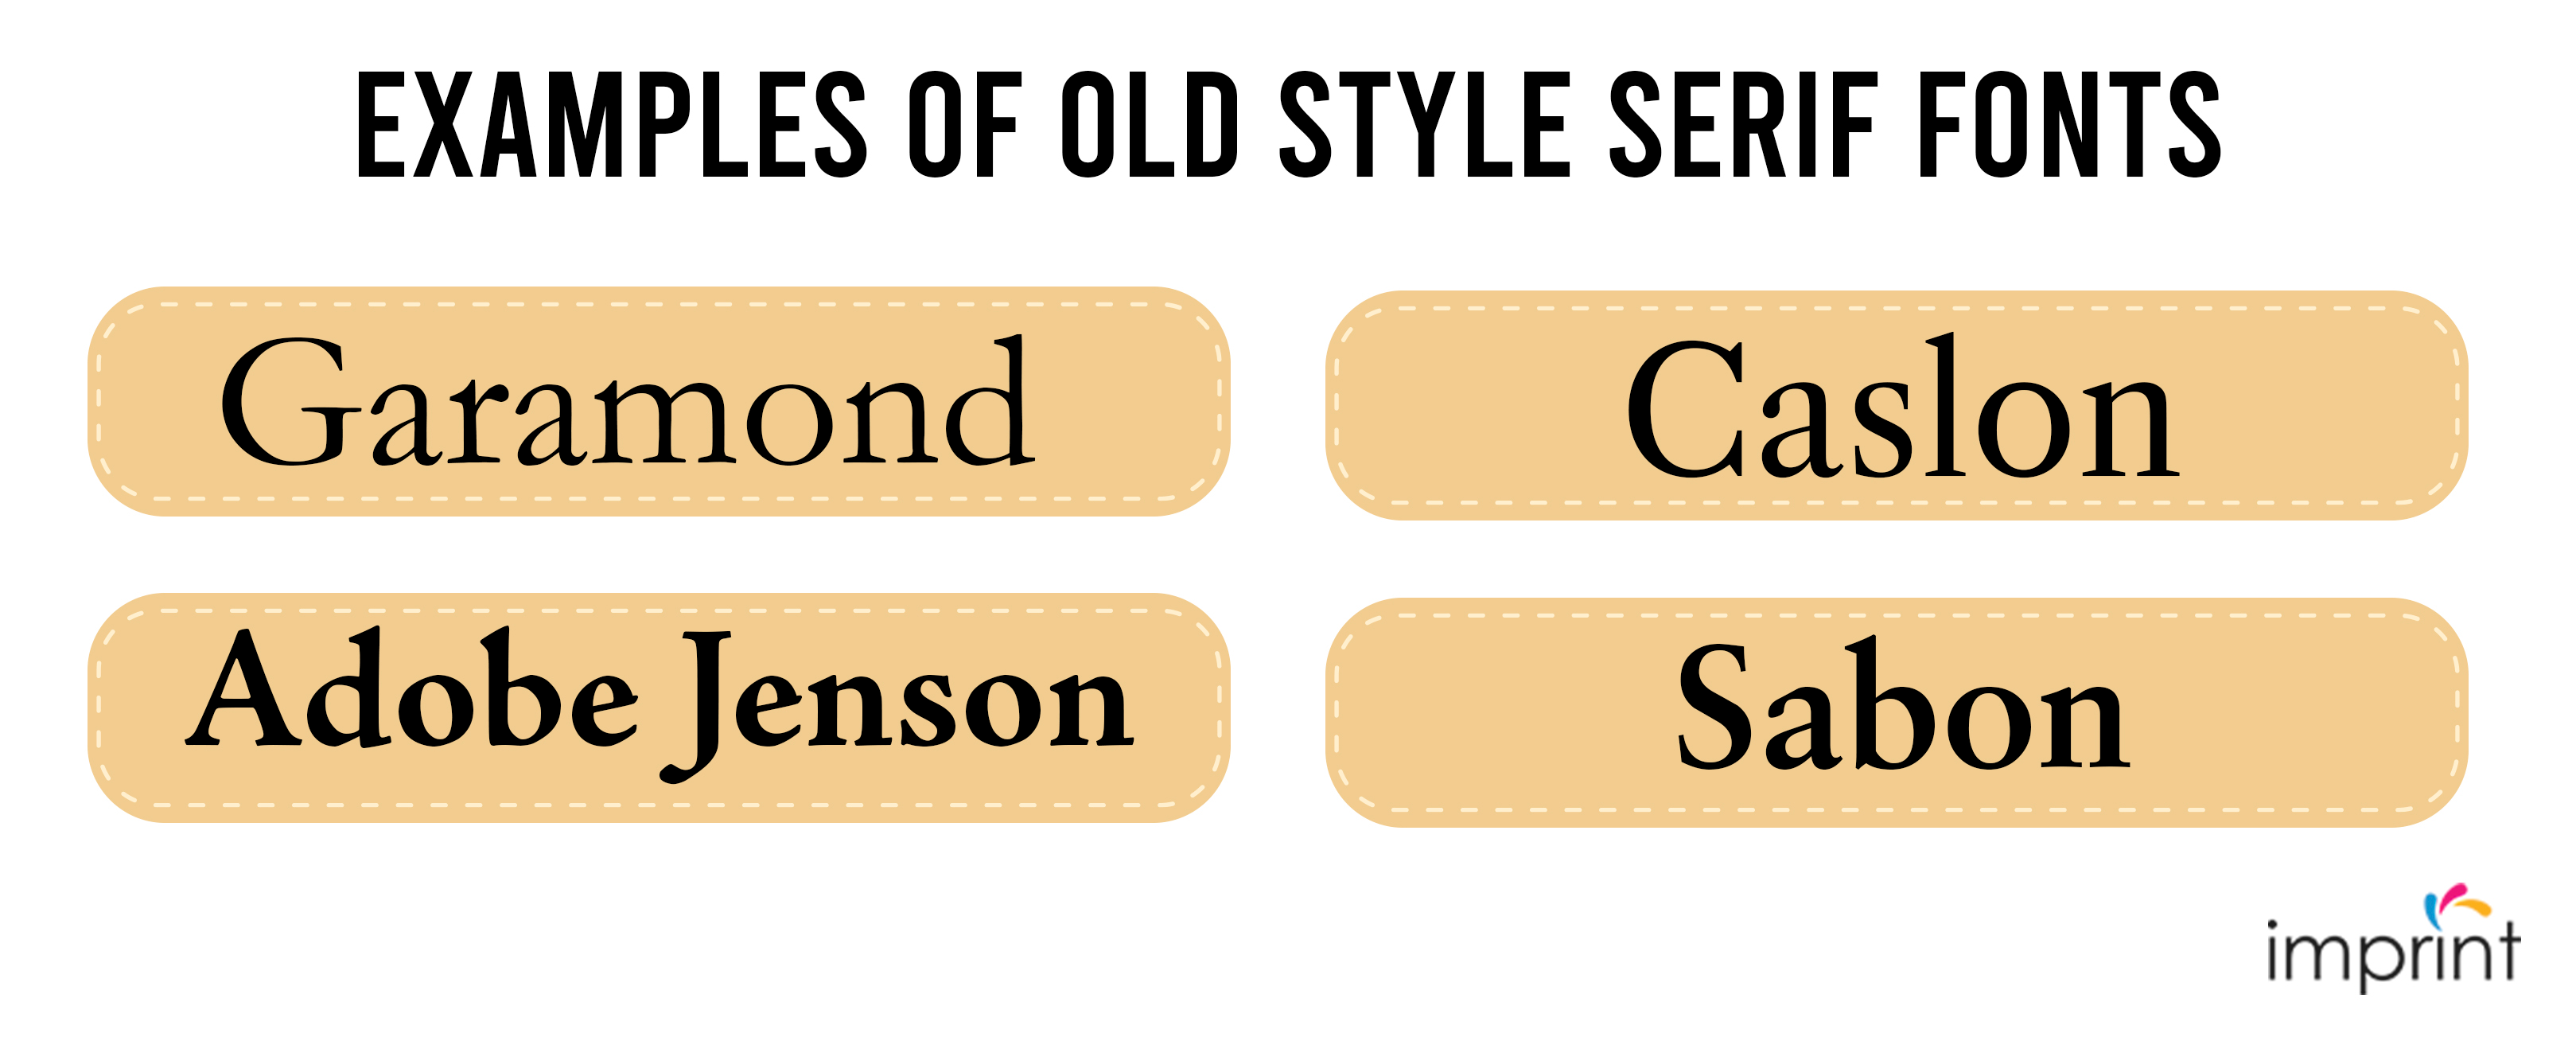 old-serif-fonts-examples